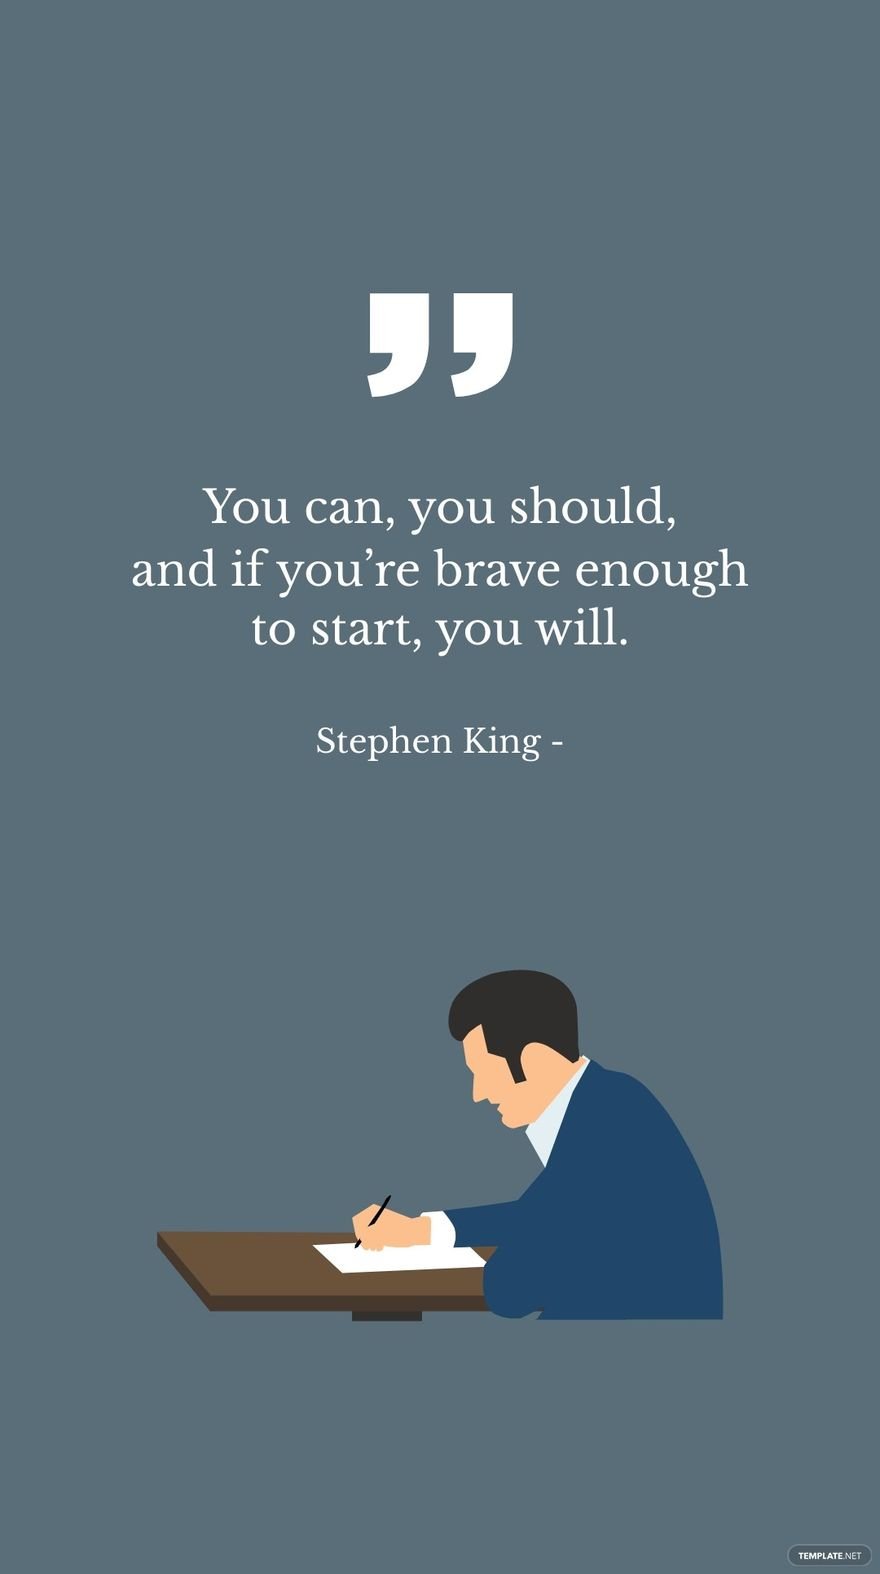 Stephen King - You can, you should, and if you’re brave enough to start, you will.